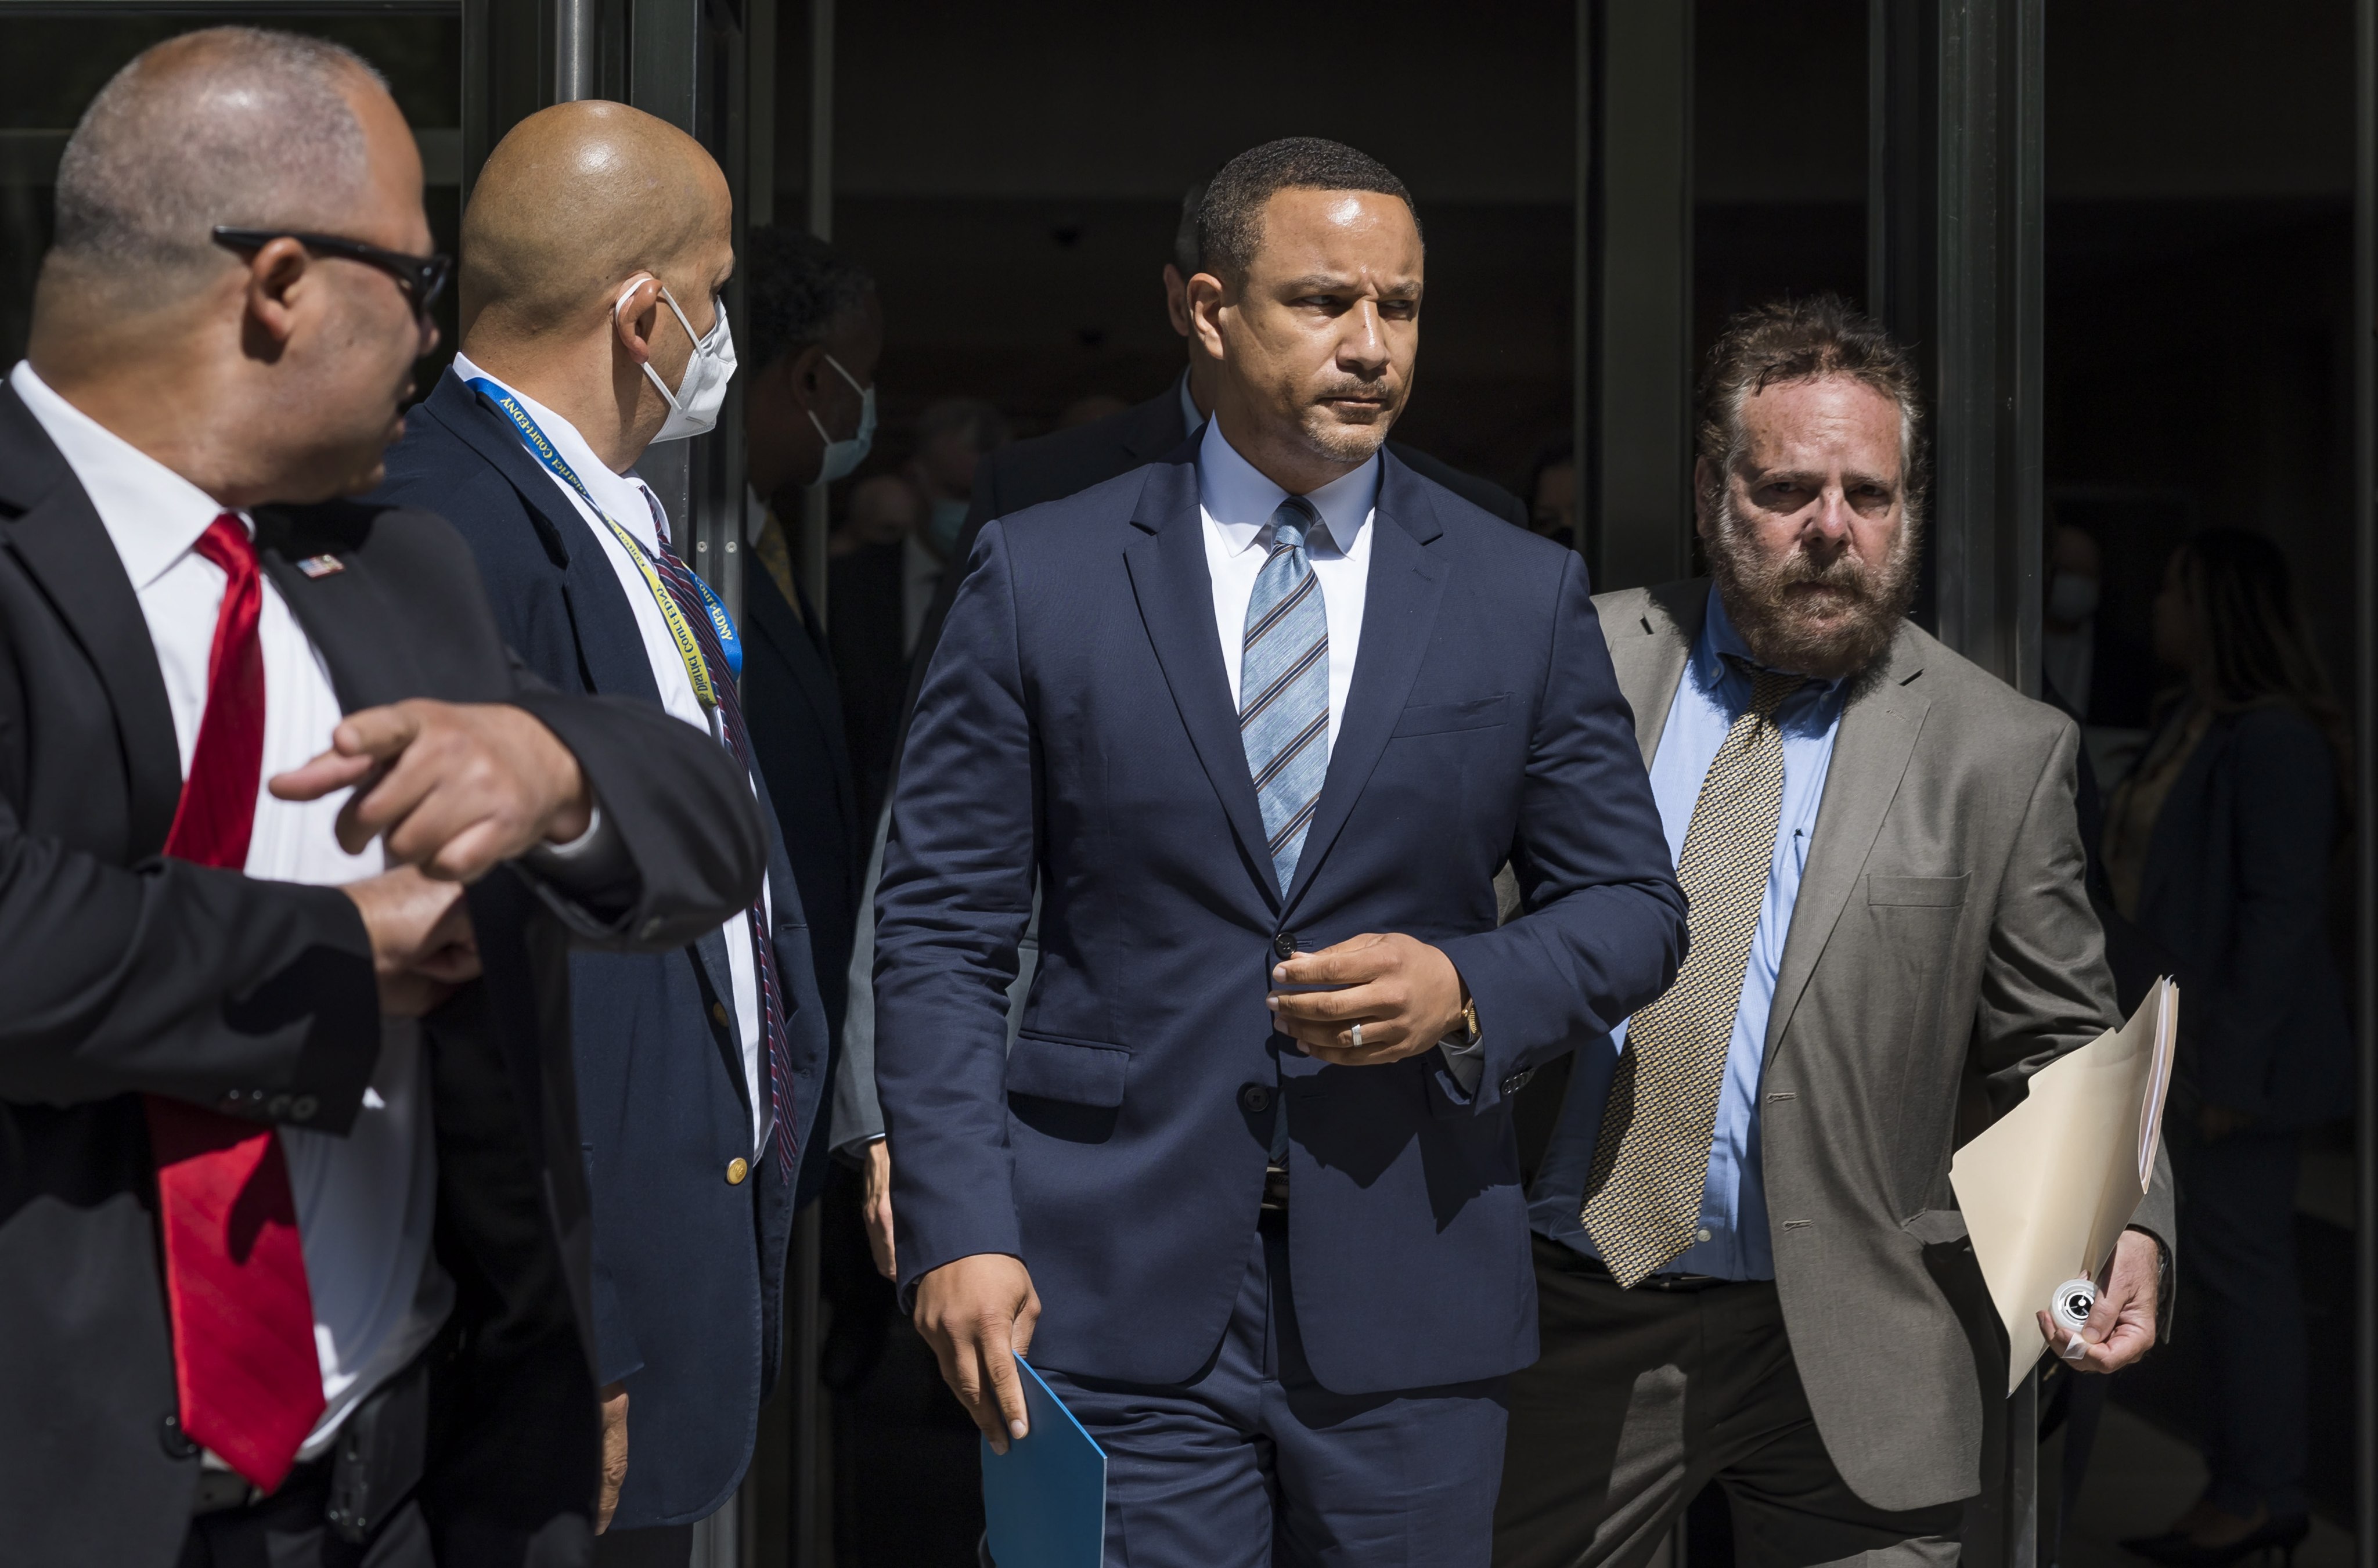 Breon Peace (centre), US Attorney for the Eastern District of New York,  outside the courthouse in Brooklyn. Peace says his office will always work to root out corrupt officials. Photo: EPA-EFE